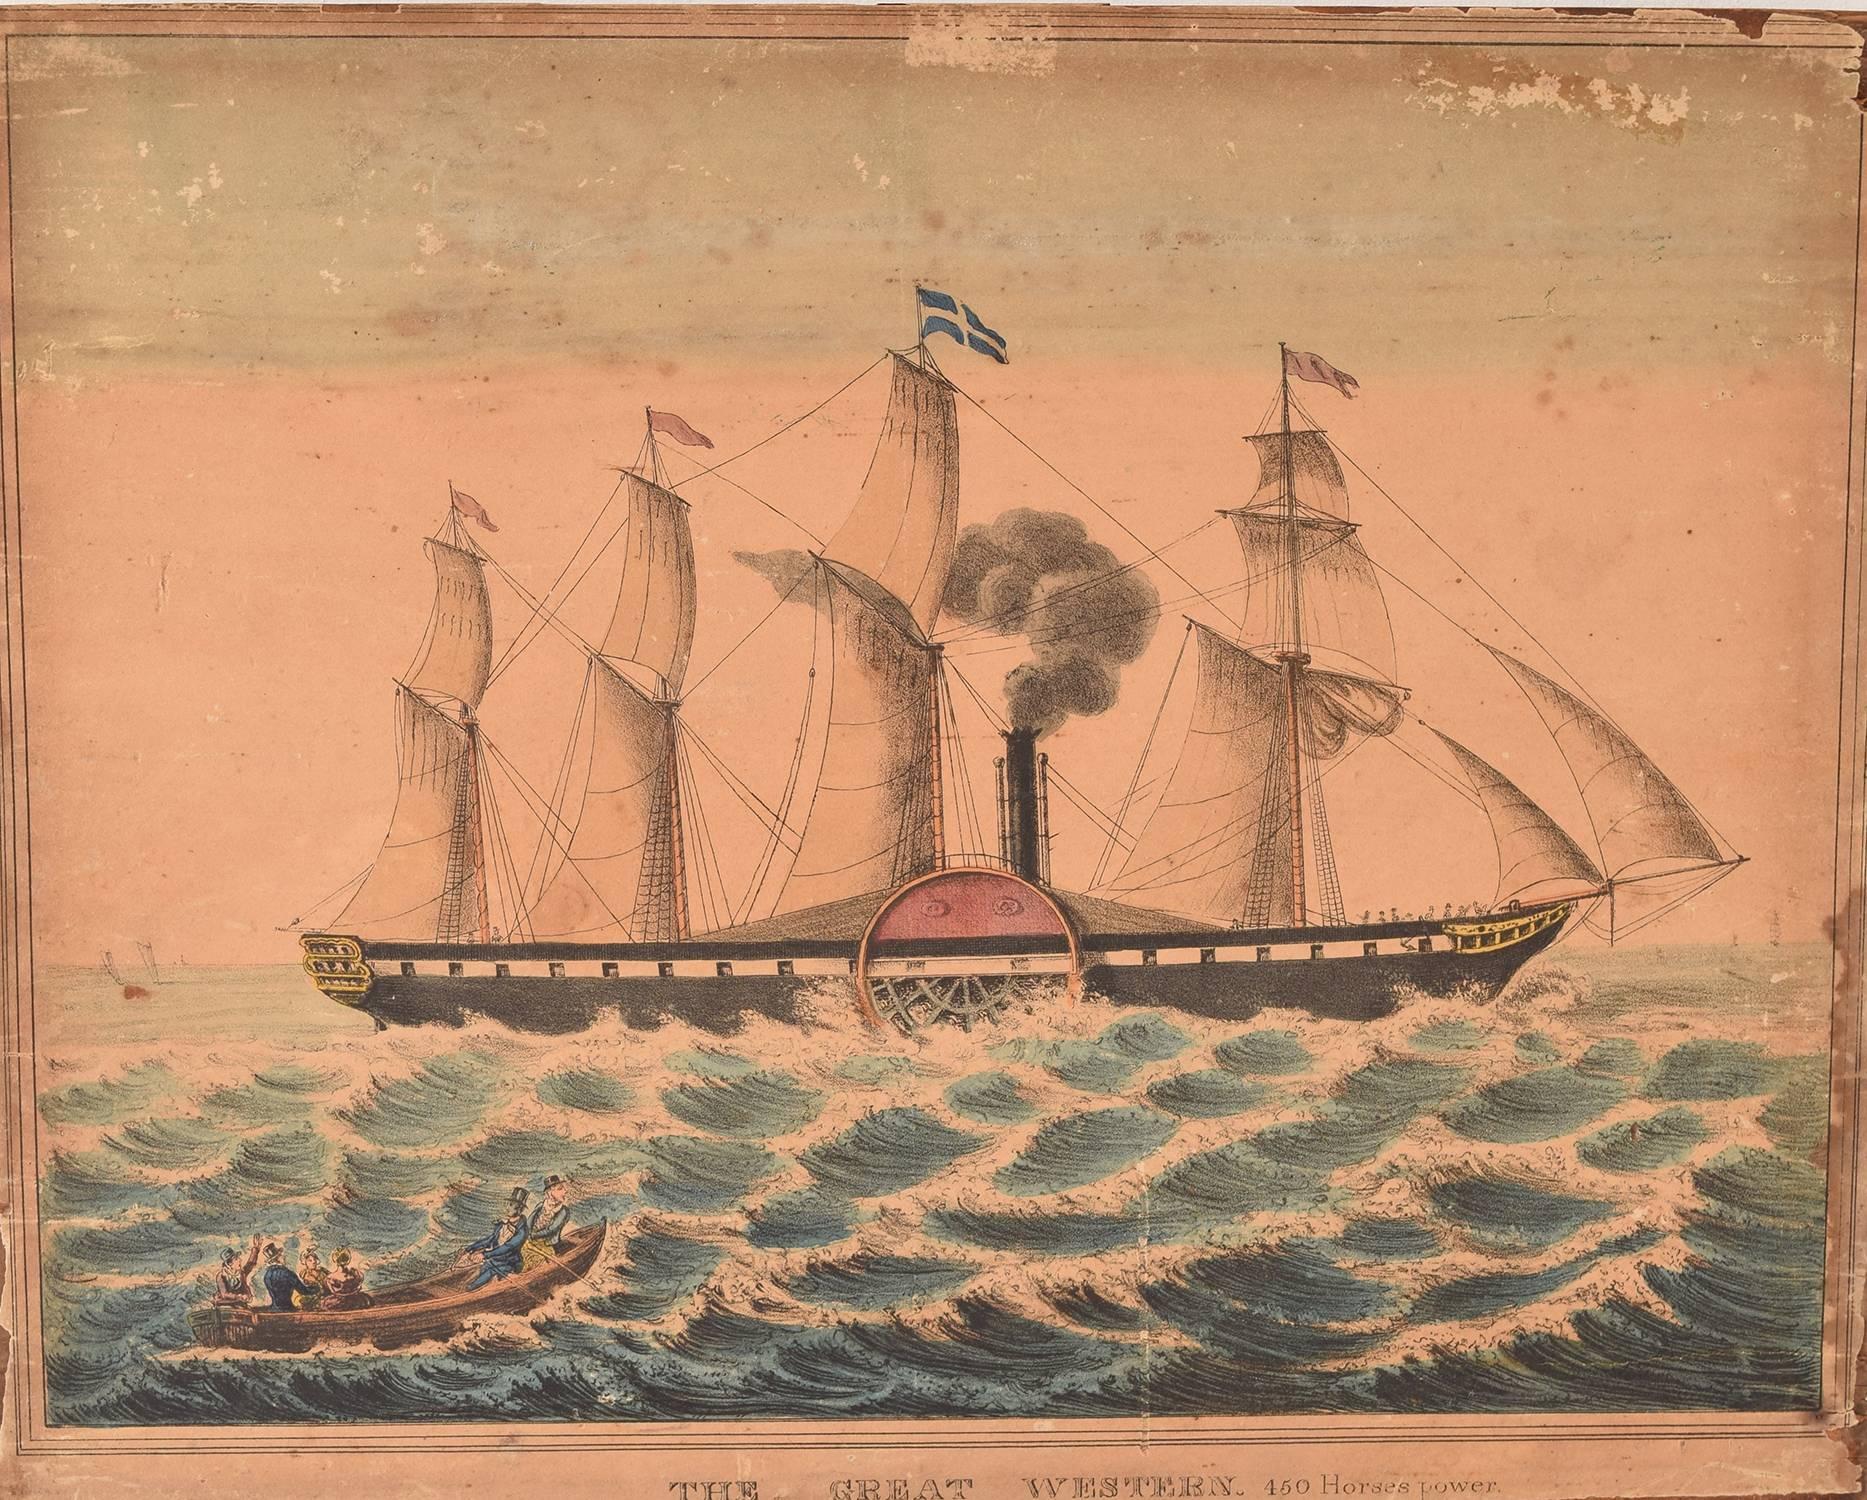 
Wonderful pair of naive marine prints.

They are lithographs on paper fixed to the original pine panels.

We have two iconic ships- the SS Great Britain and the famous Great Western.

Published by J.L. Marks, London, dated 1843.

They are